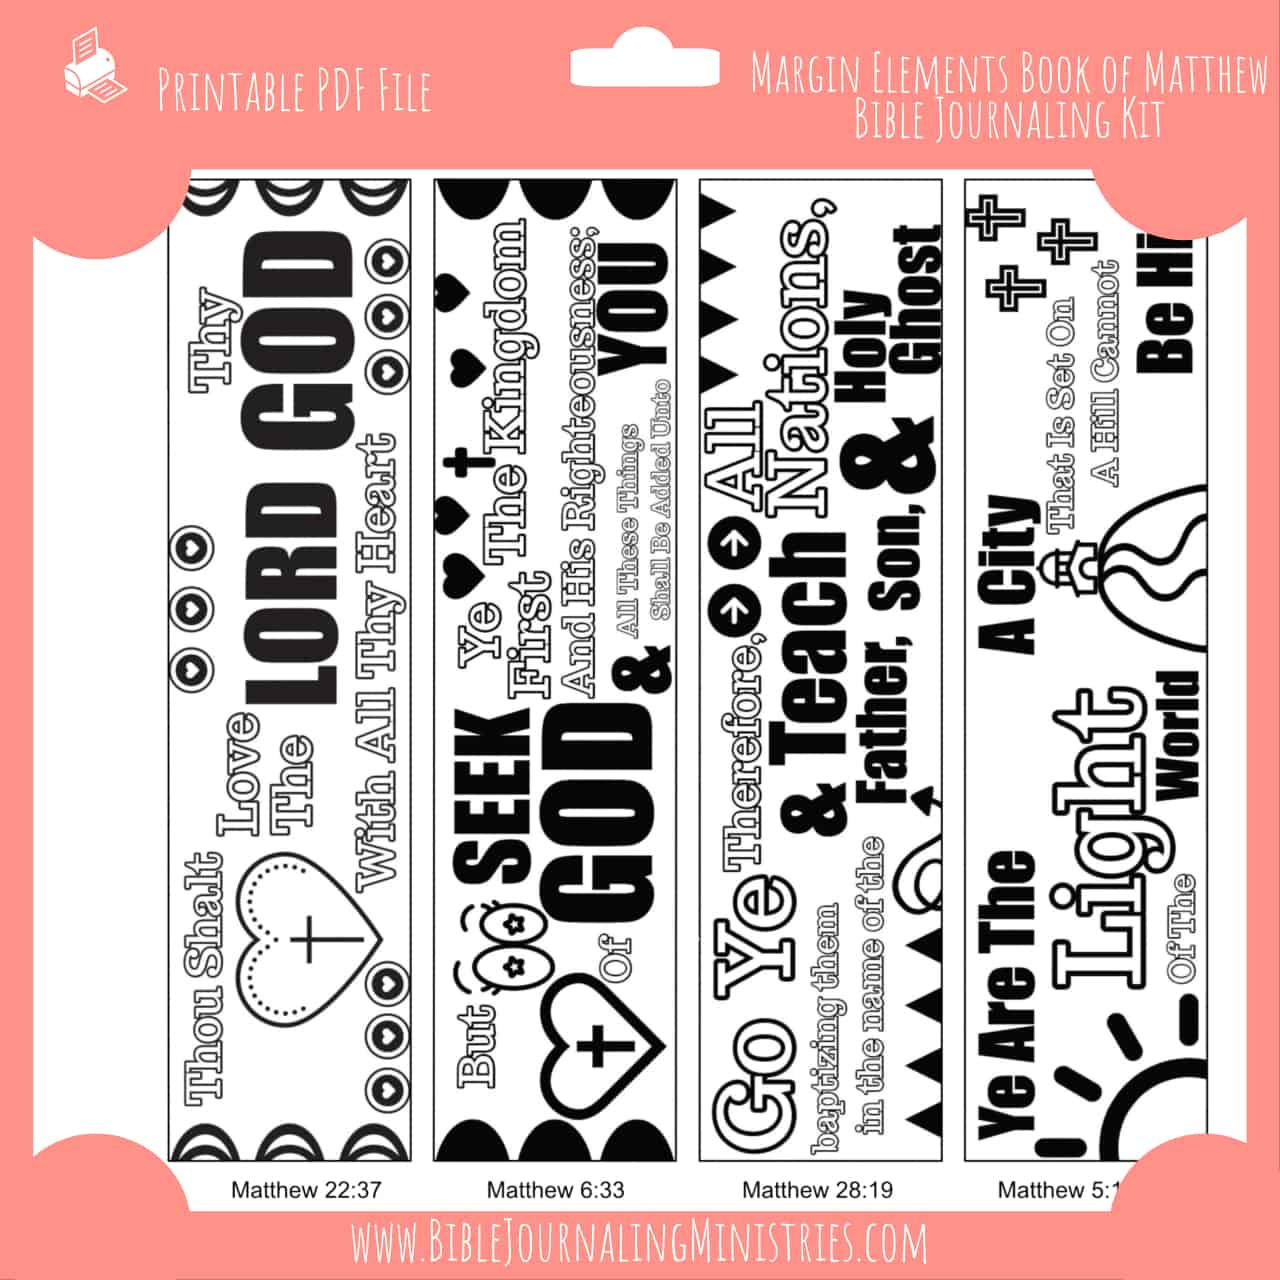 Free Printable Bible Planner Stickers - World of Printables